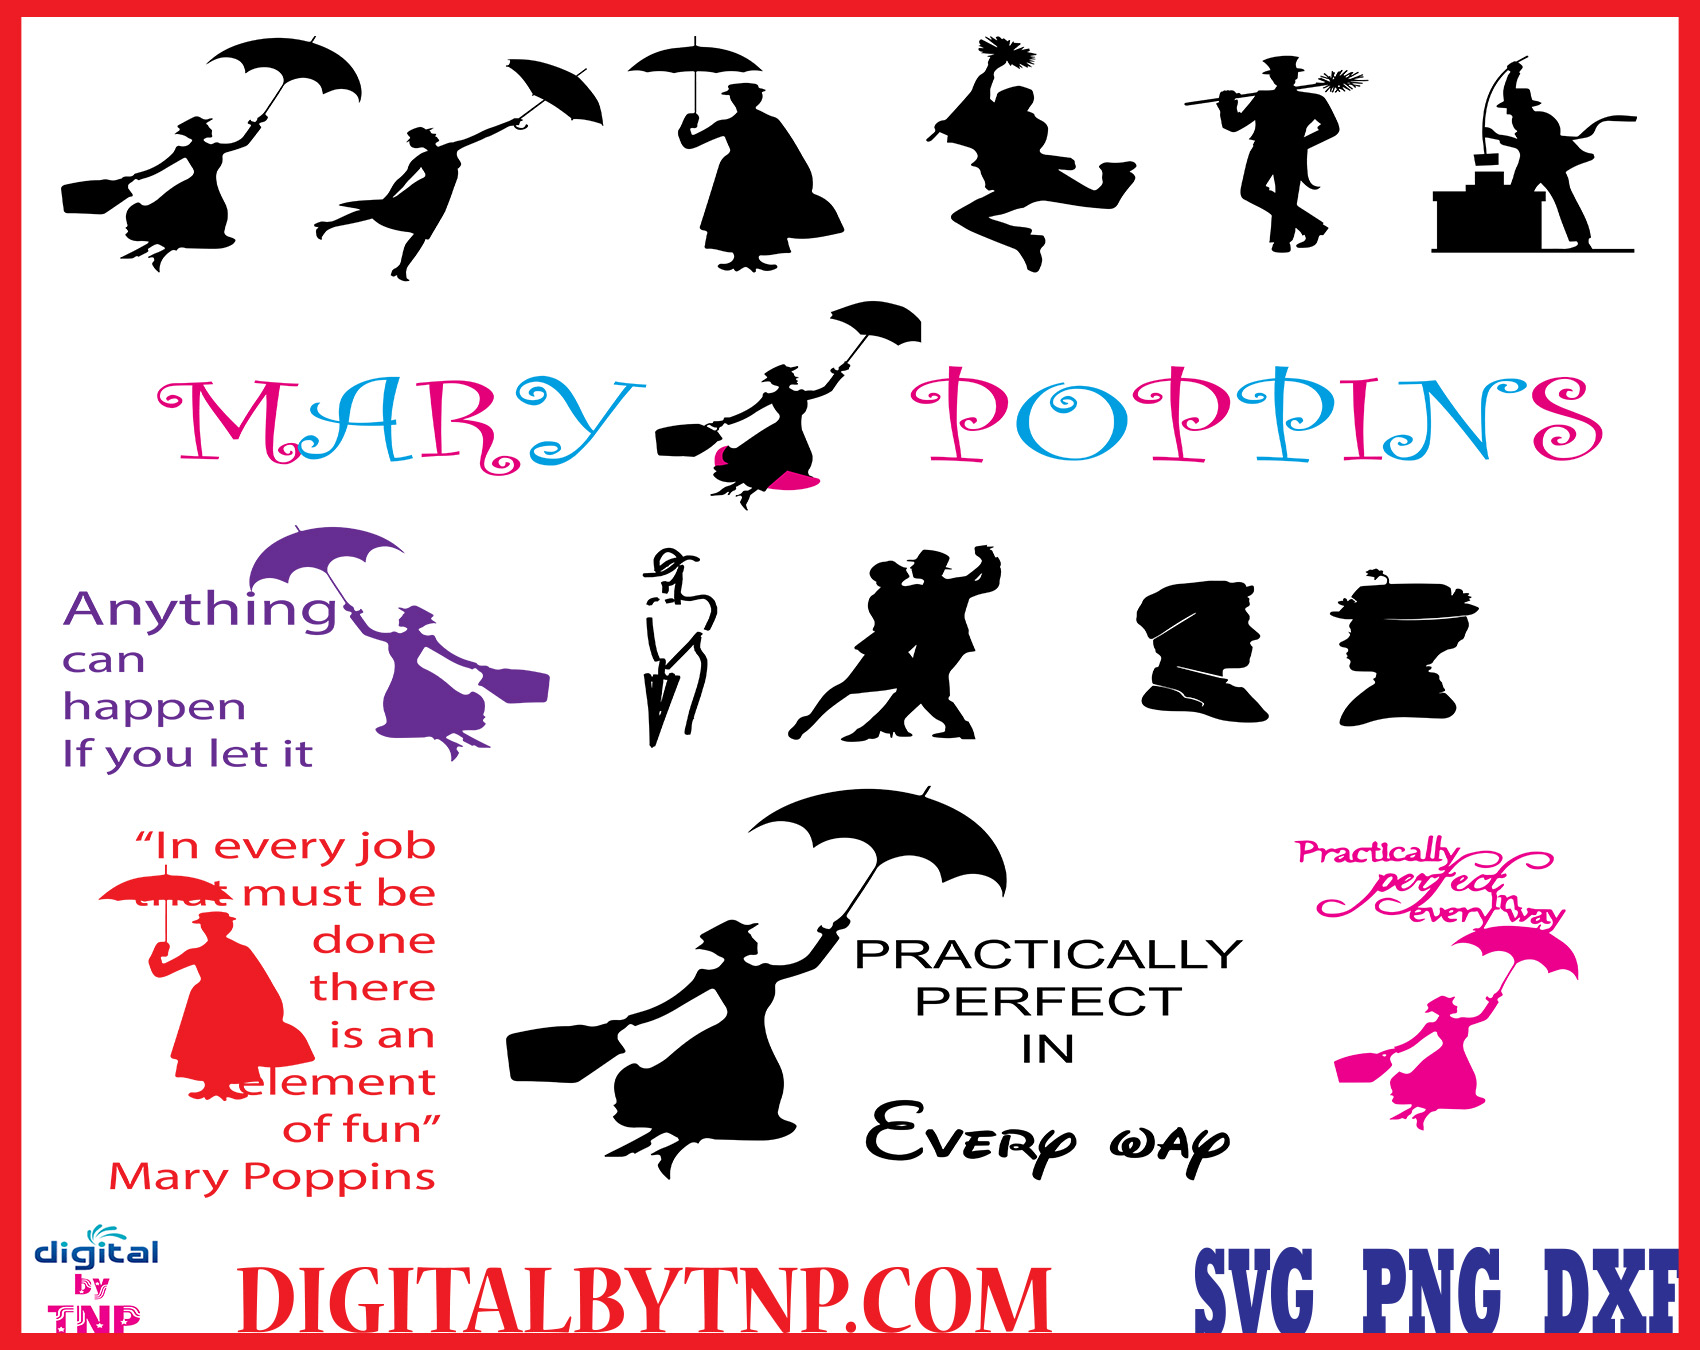 Mary Poppins Svg Mary Poppins Silhouette Mary Poppins Clip Art Mary Poppins Vector Files For Silhouette Cameo Cricut Customer Satisfaction Is Our Priority